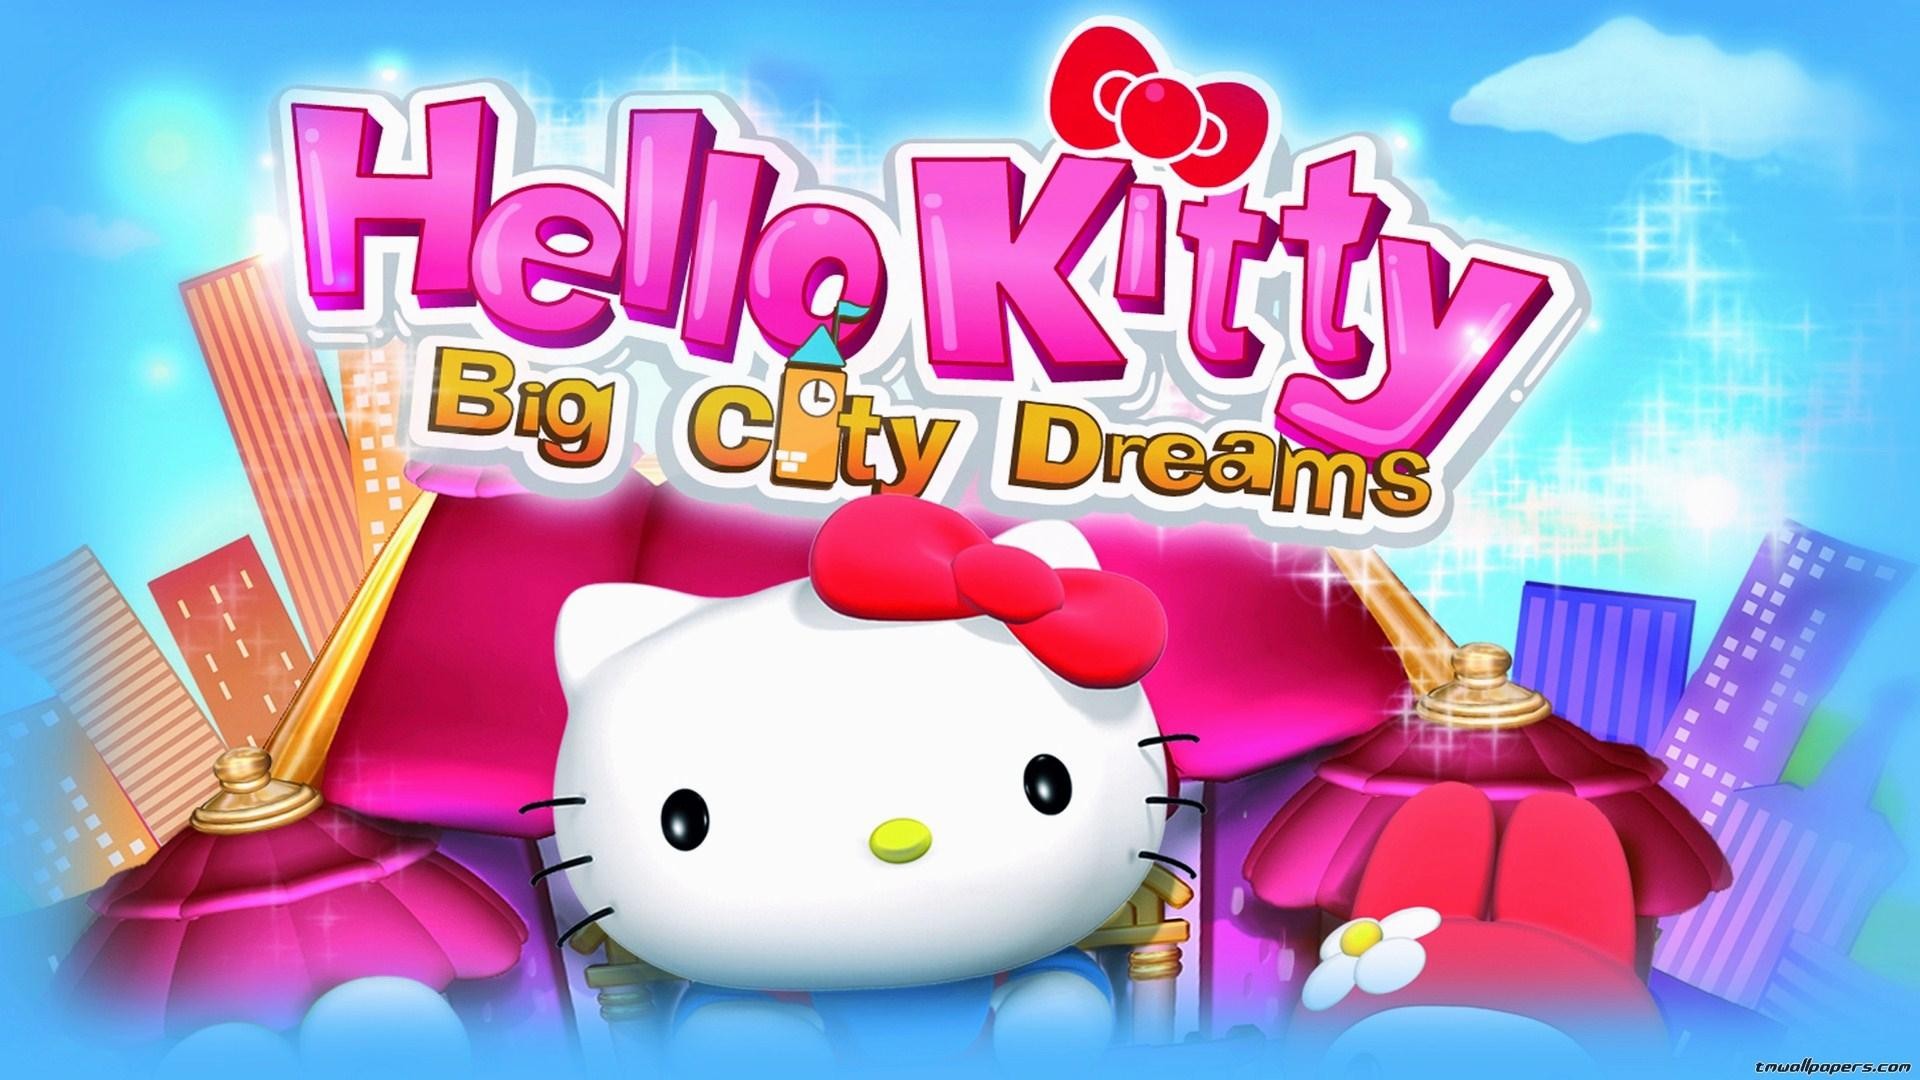 Best Hello Kitty Wallpaper with image resolution 1920x1080 pixel. You can use this wallpaper as background for your desktop Computer Screensavers, Android or iPhone smartphones